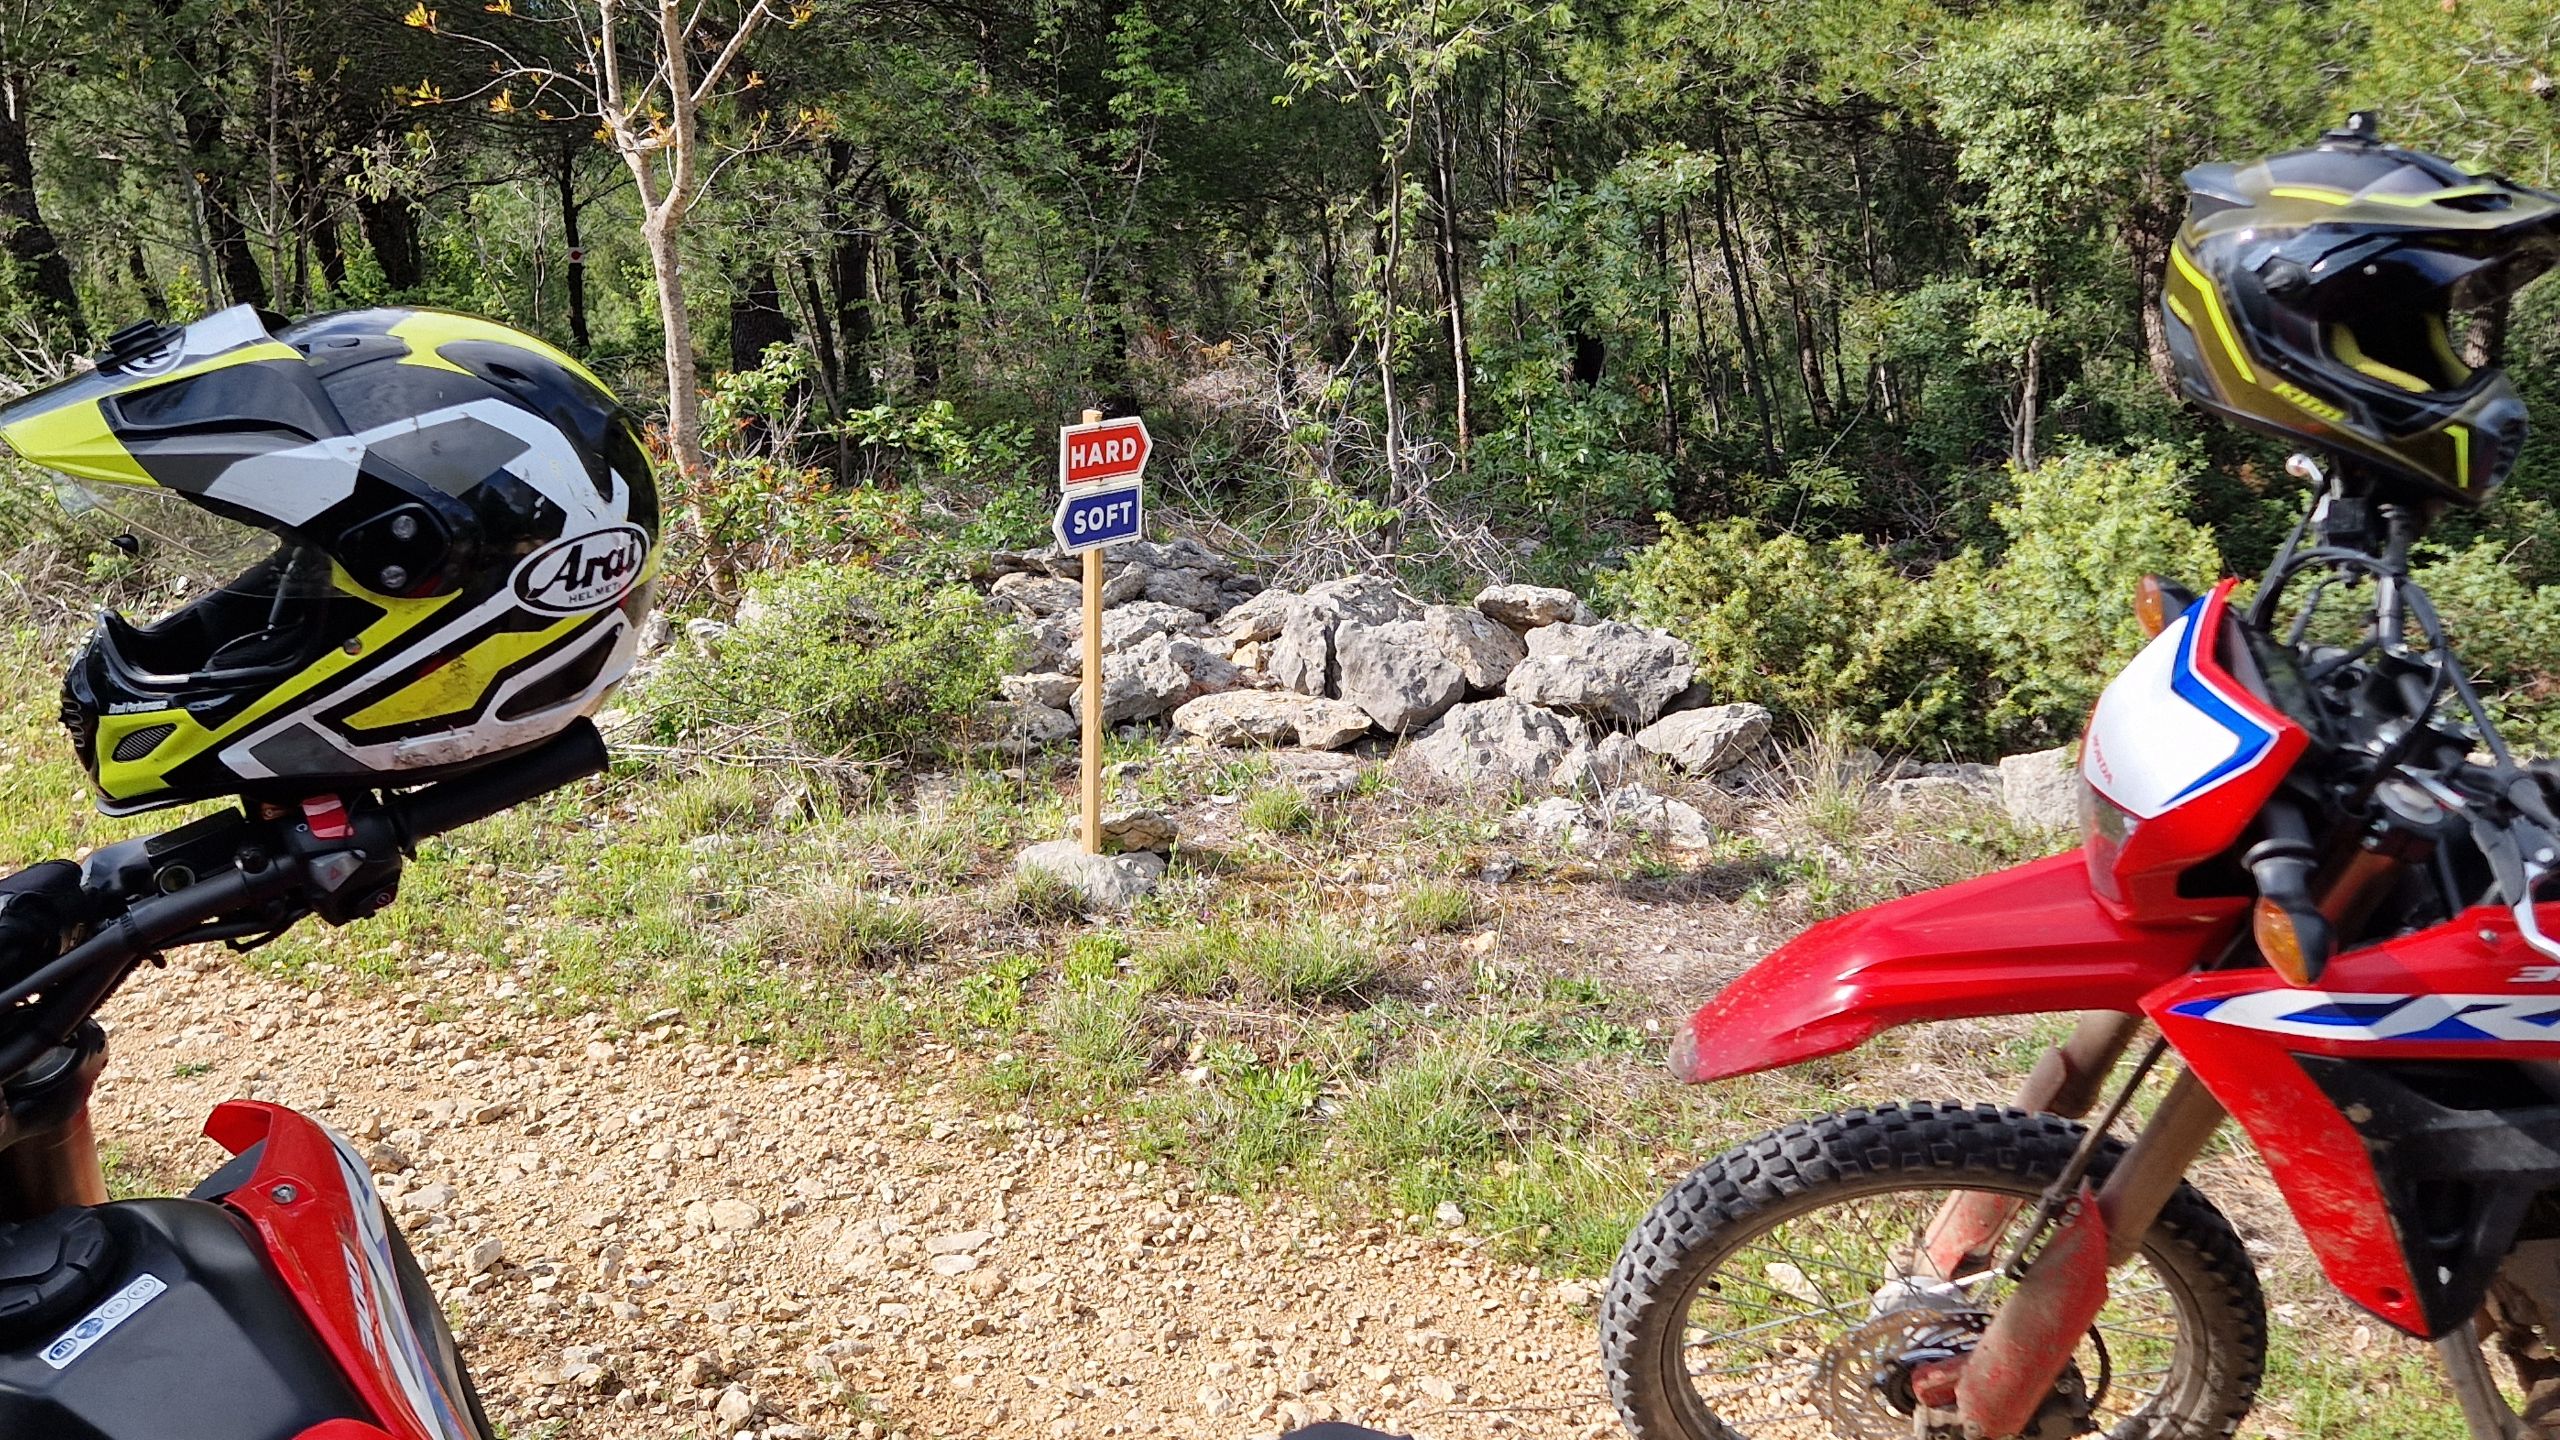 Funmoto ADVentures sightseeing motorcycle tour in Croatia hard and soft trails